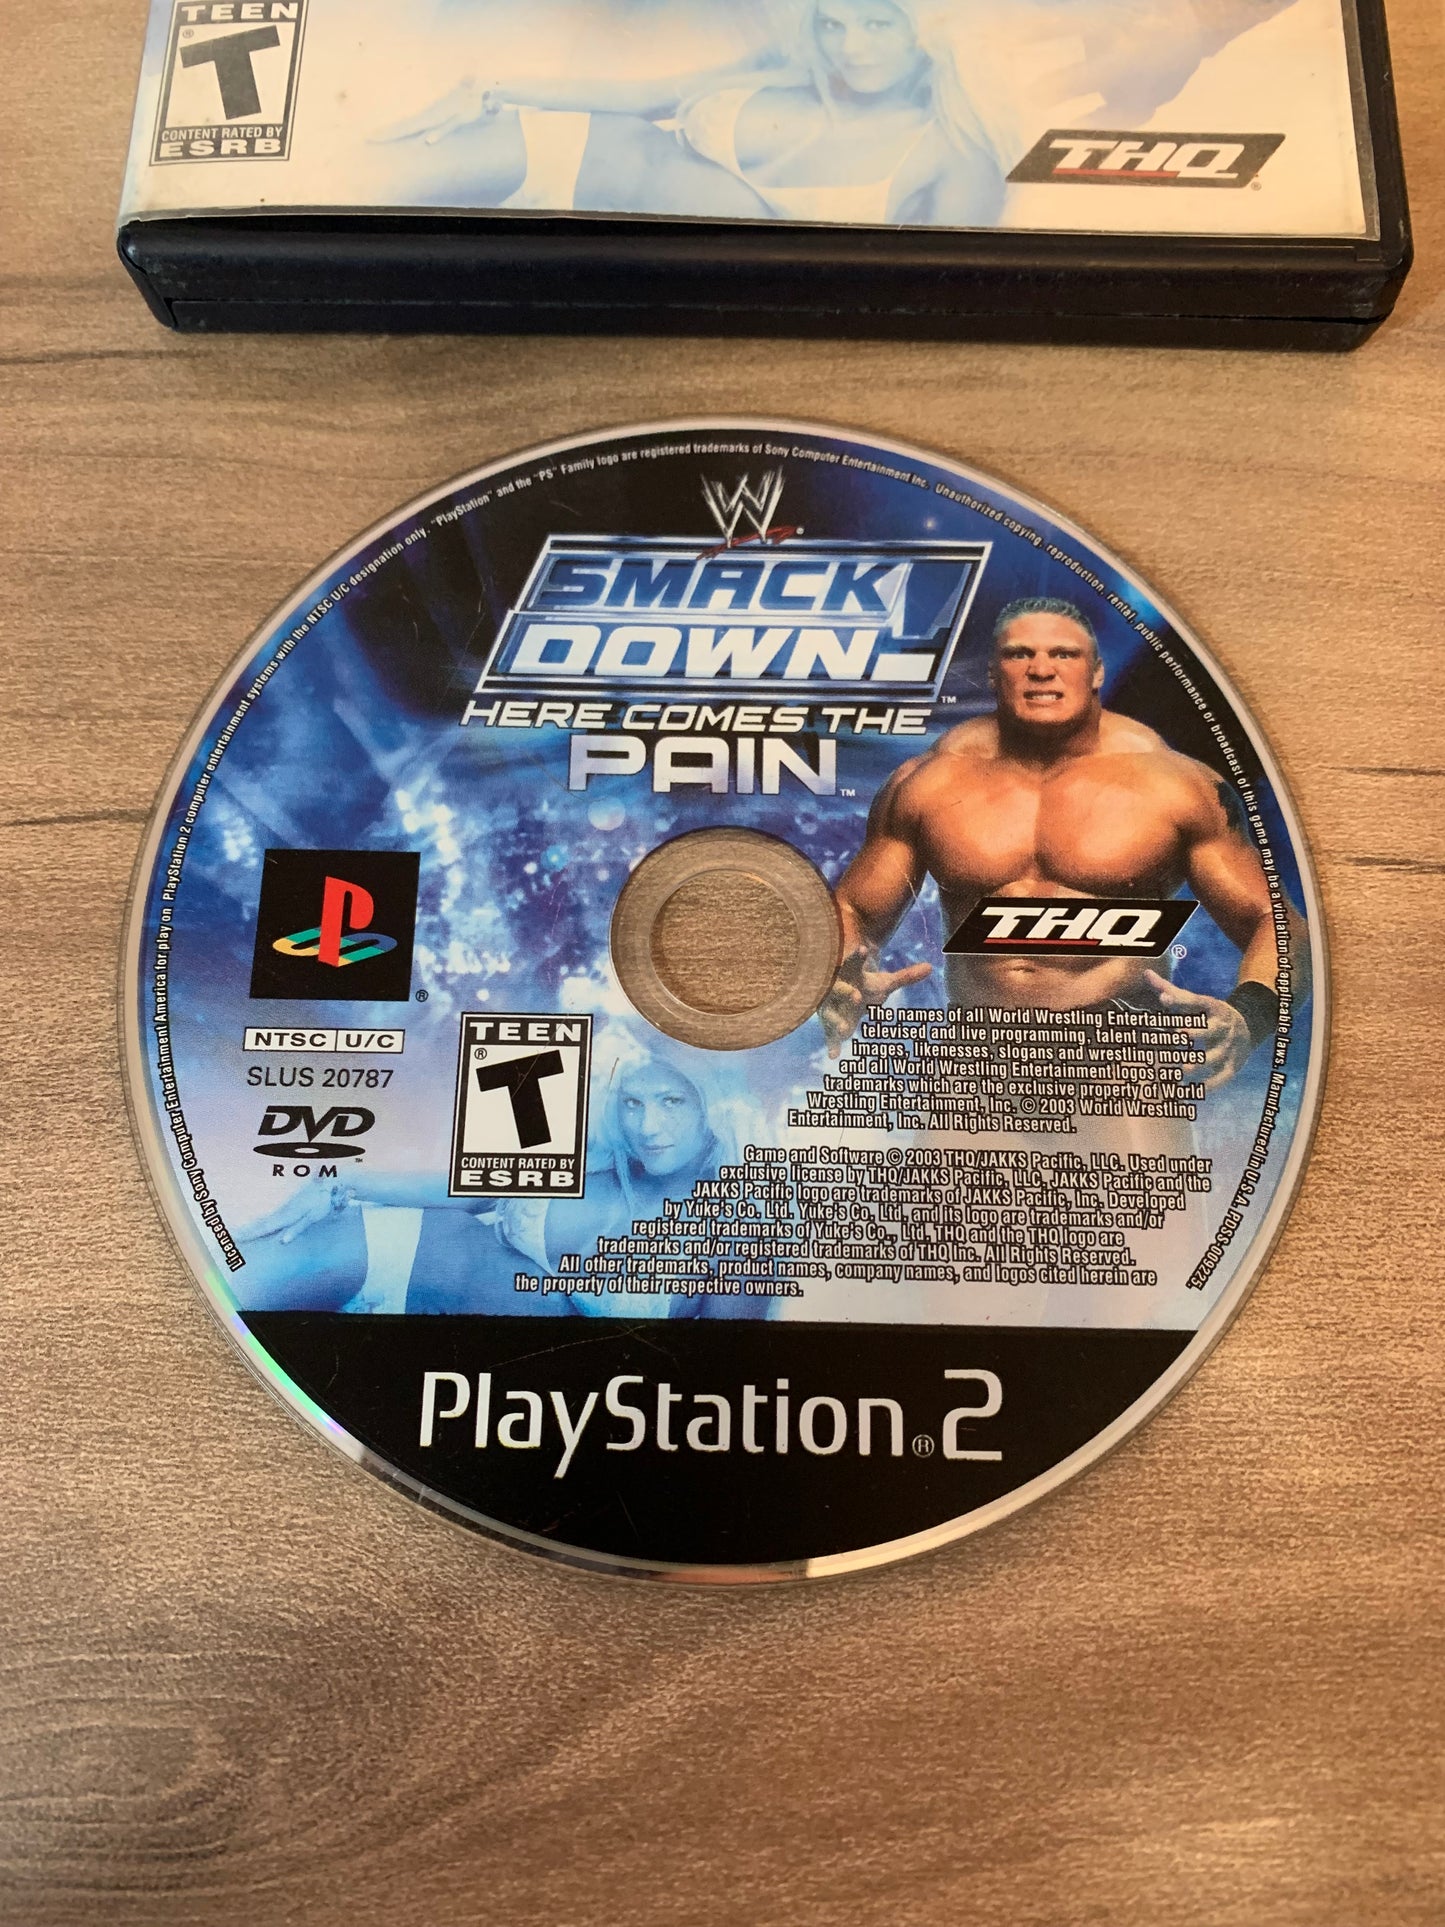 SONY PLAYSTATiON 2 [PS2] | WWE SMACKDOWN HERE COMES THE PAiN